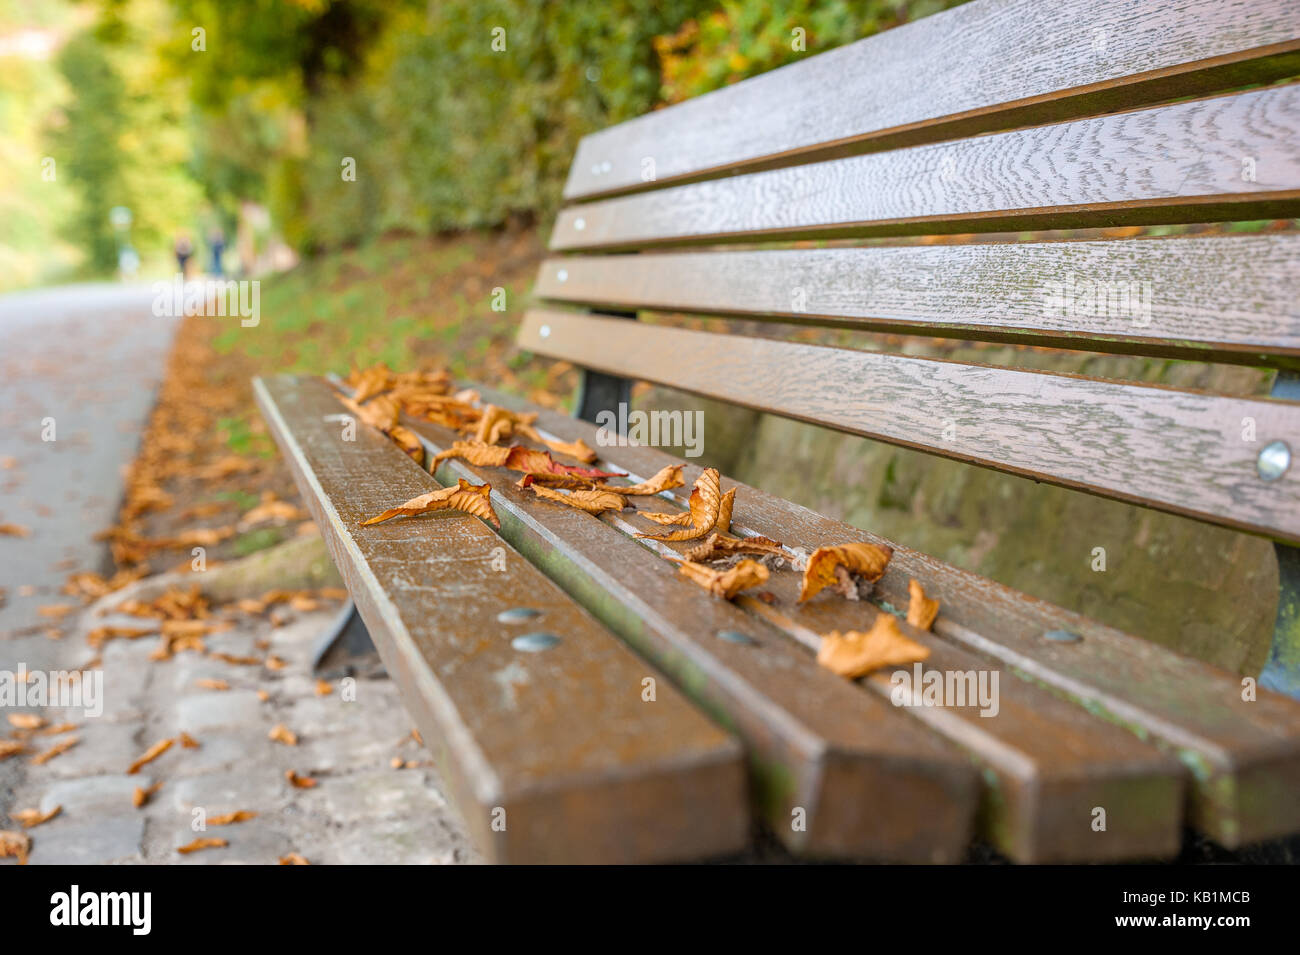 Fallen leaves on the empty bench in a public park Stock Photo